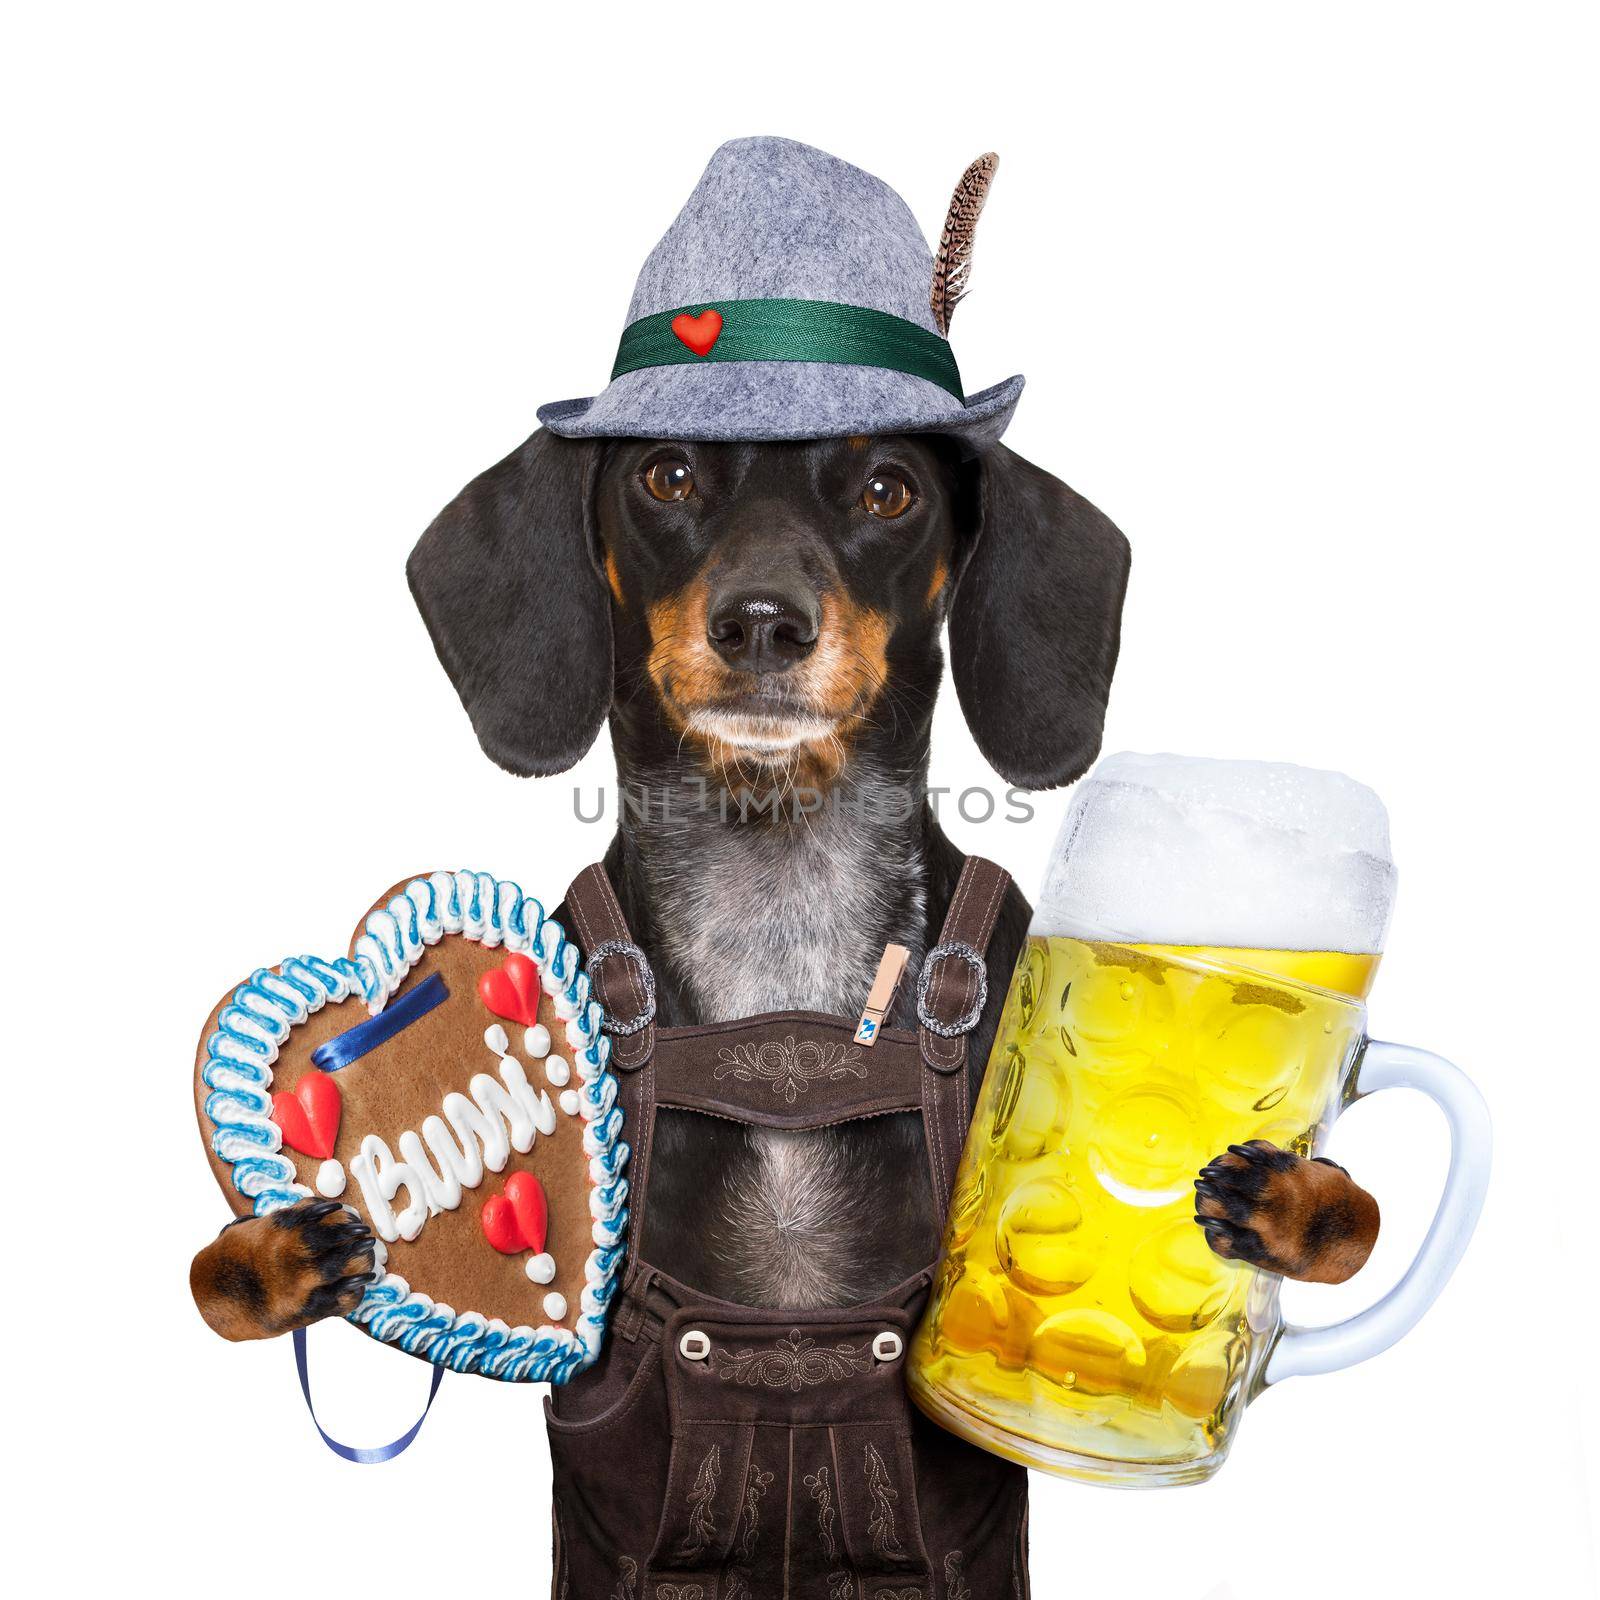 bavarian dachshund or sausage  dog with  gingerbread and  mug  isolated on white background , ready for the beer celebration festival in munich,